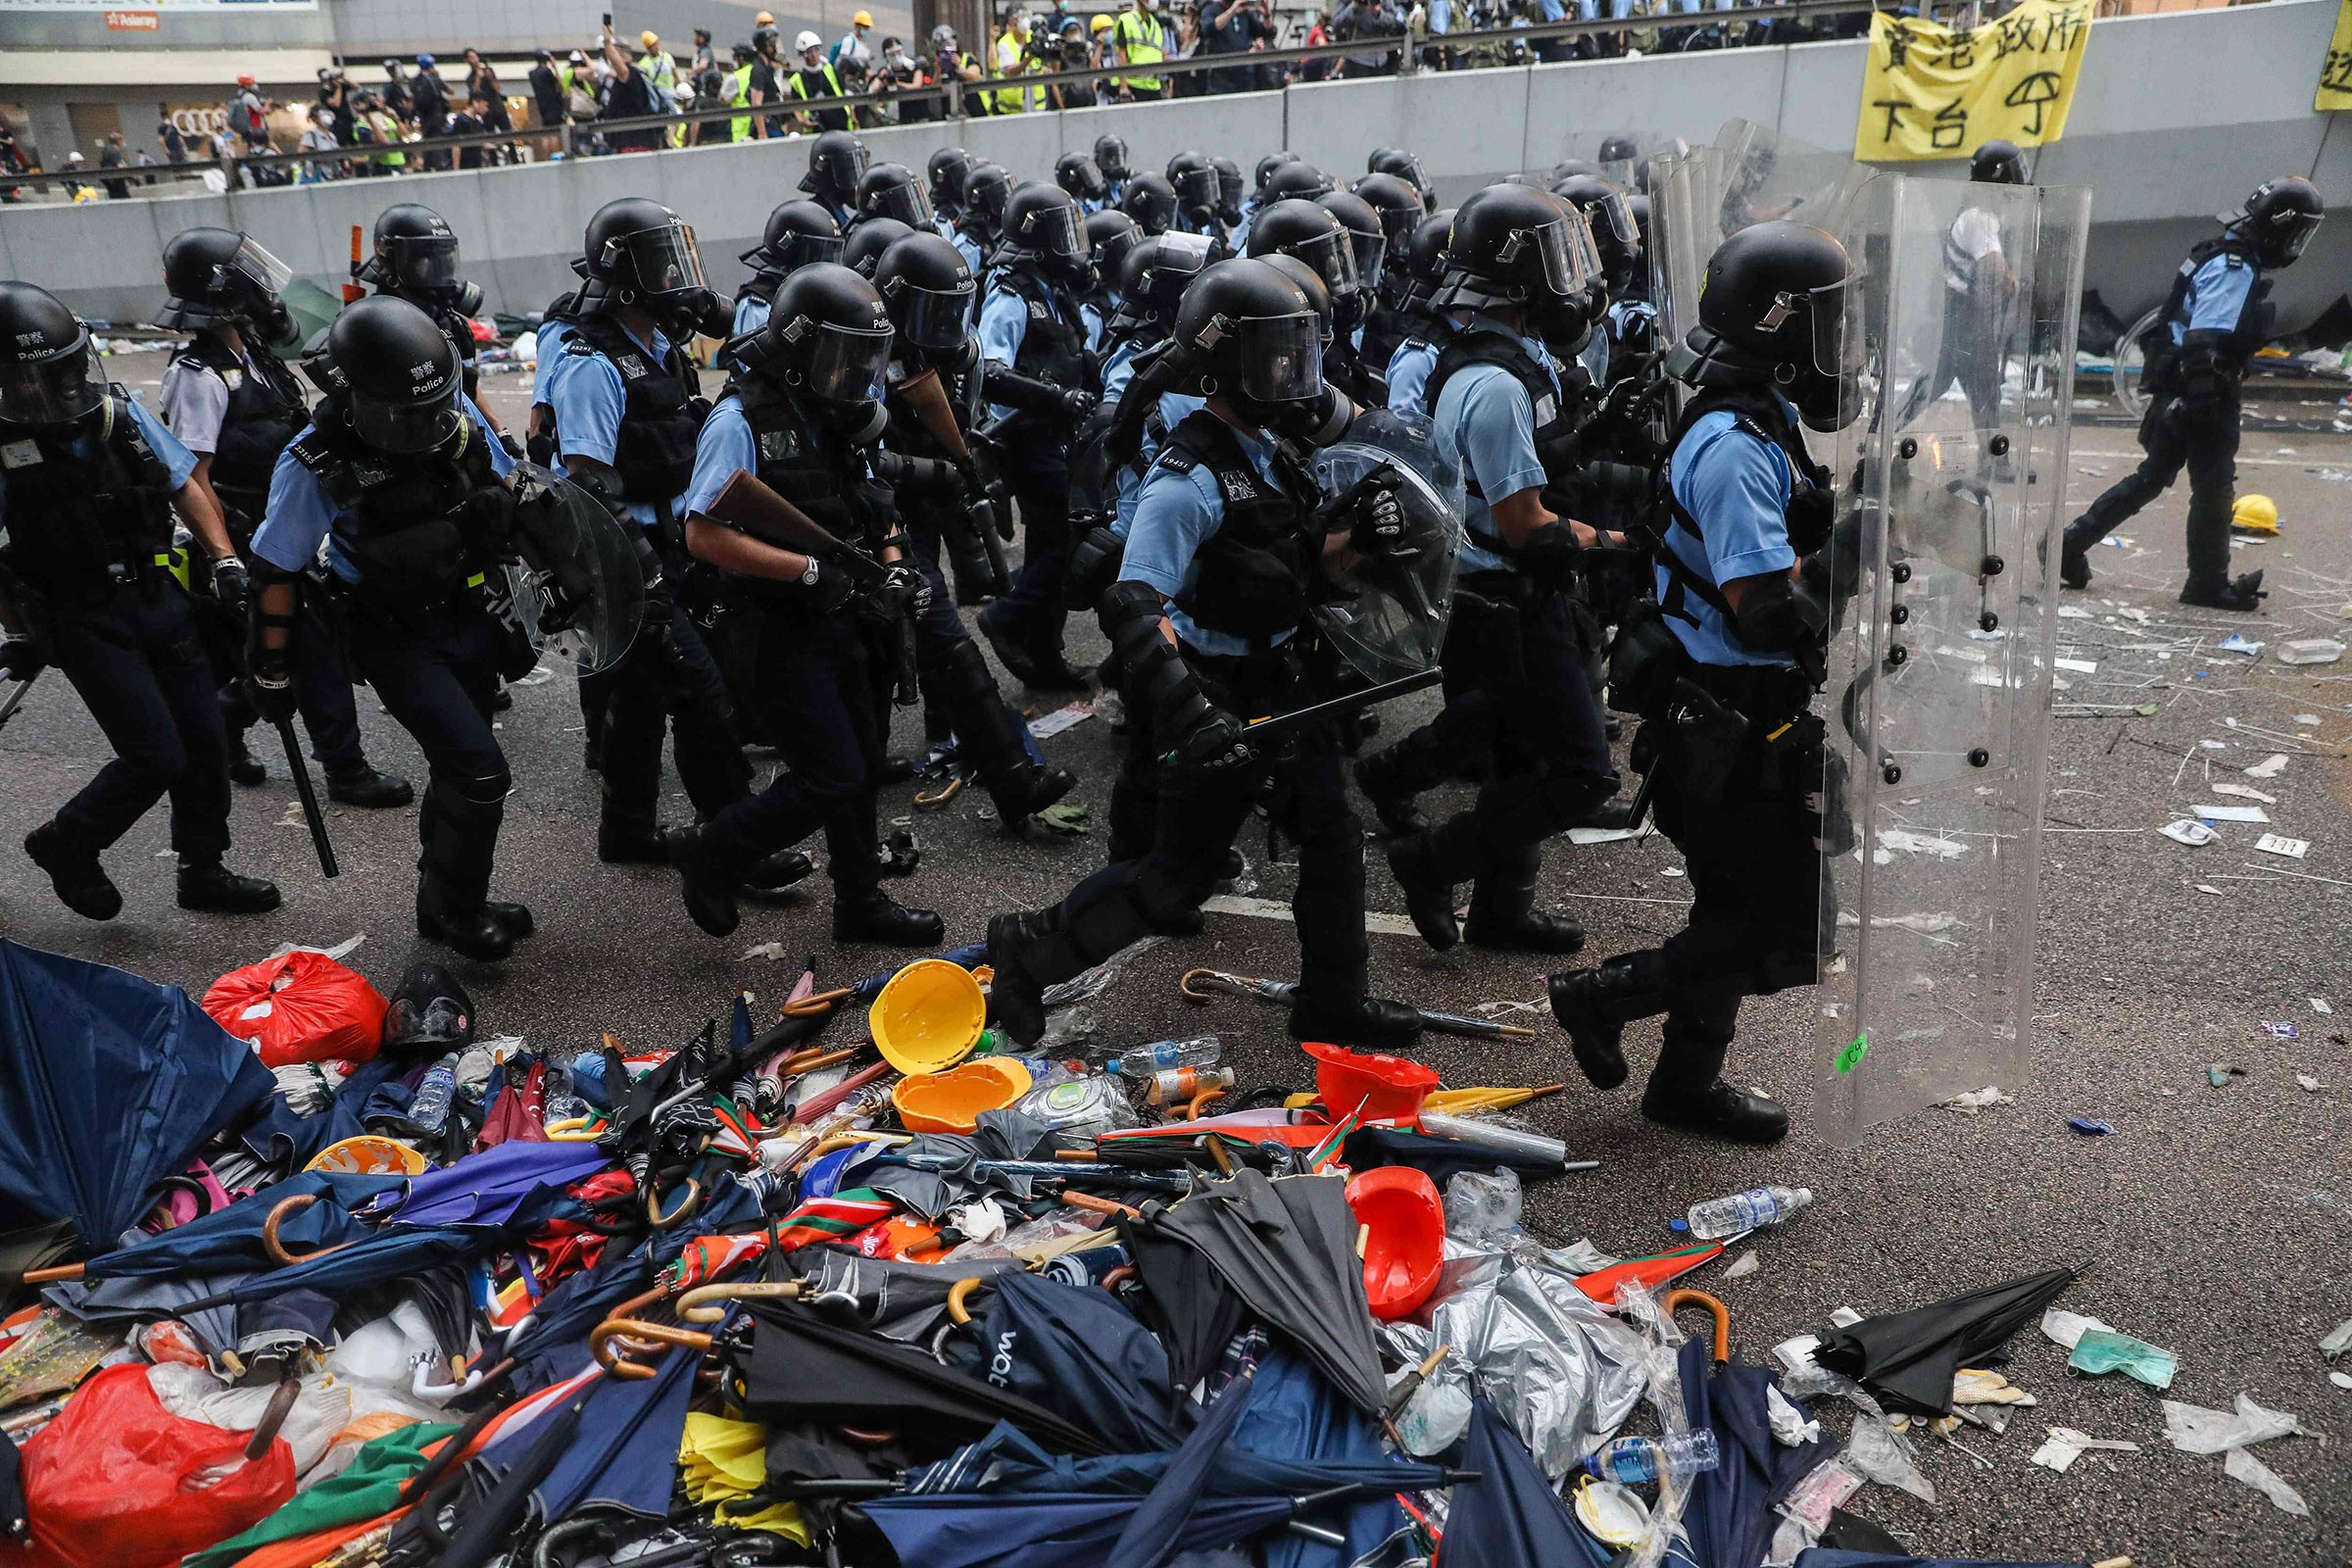 Police advance towards protesters during a rally against a controversial extradition law proposal outside the government headquarters in Hong Kong on June 12.